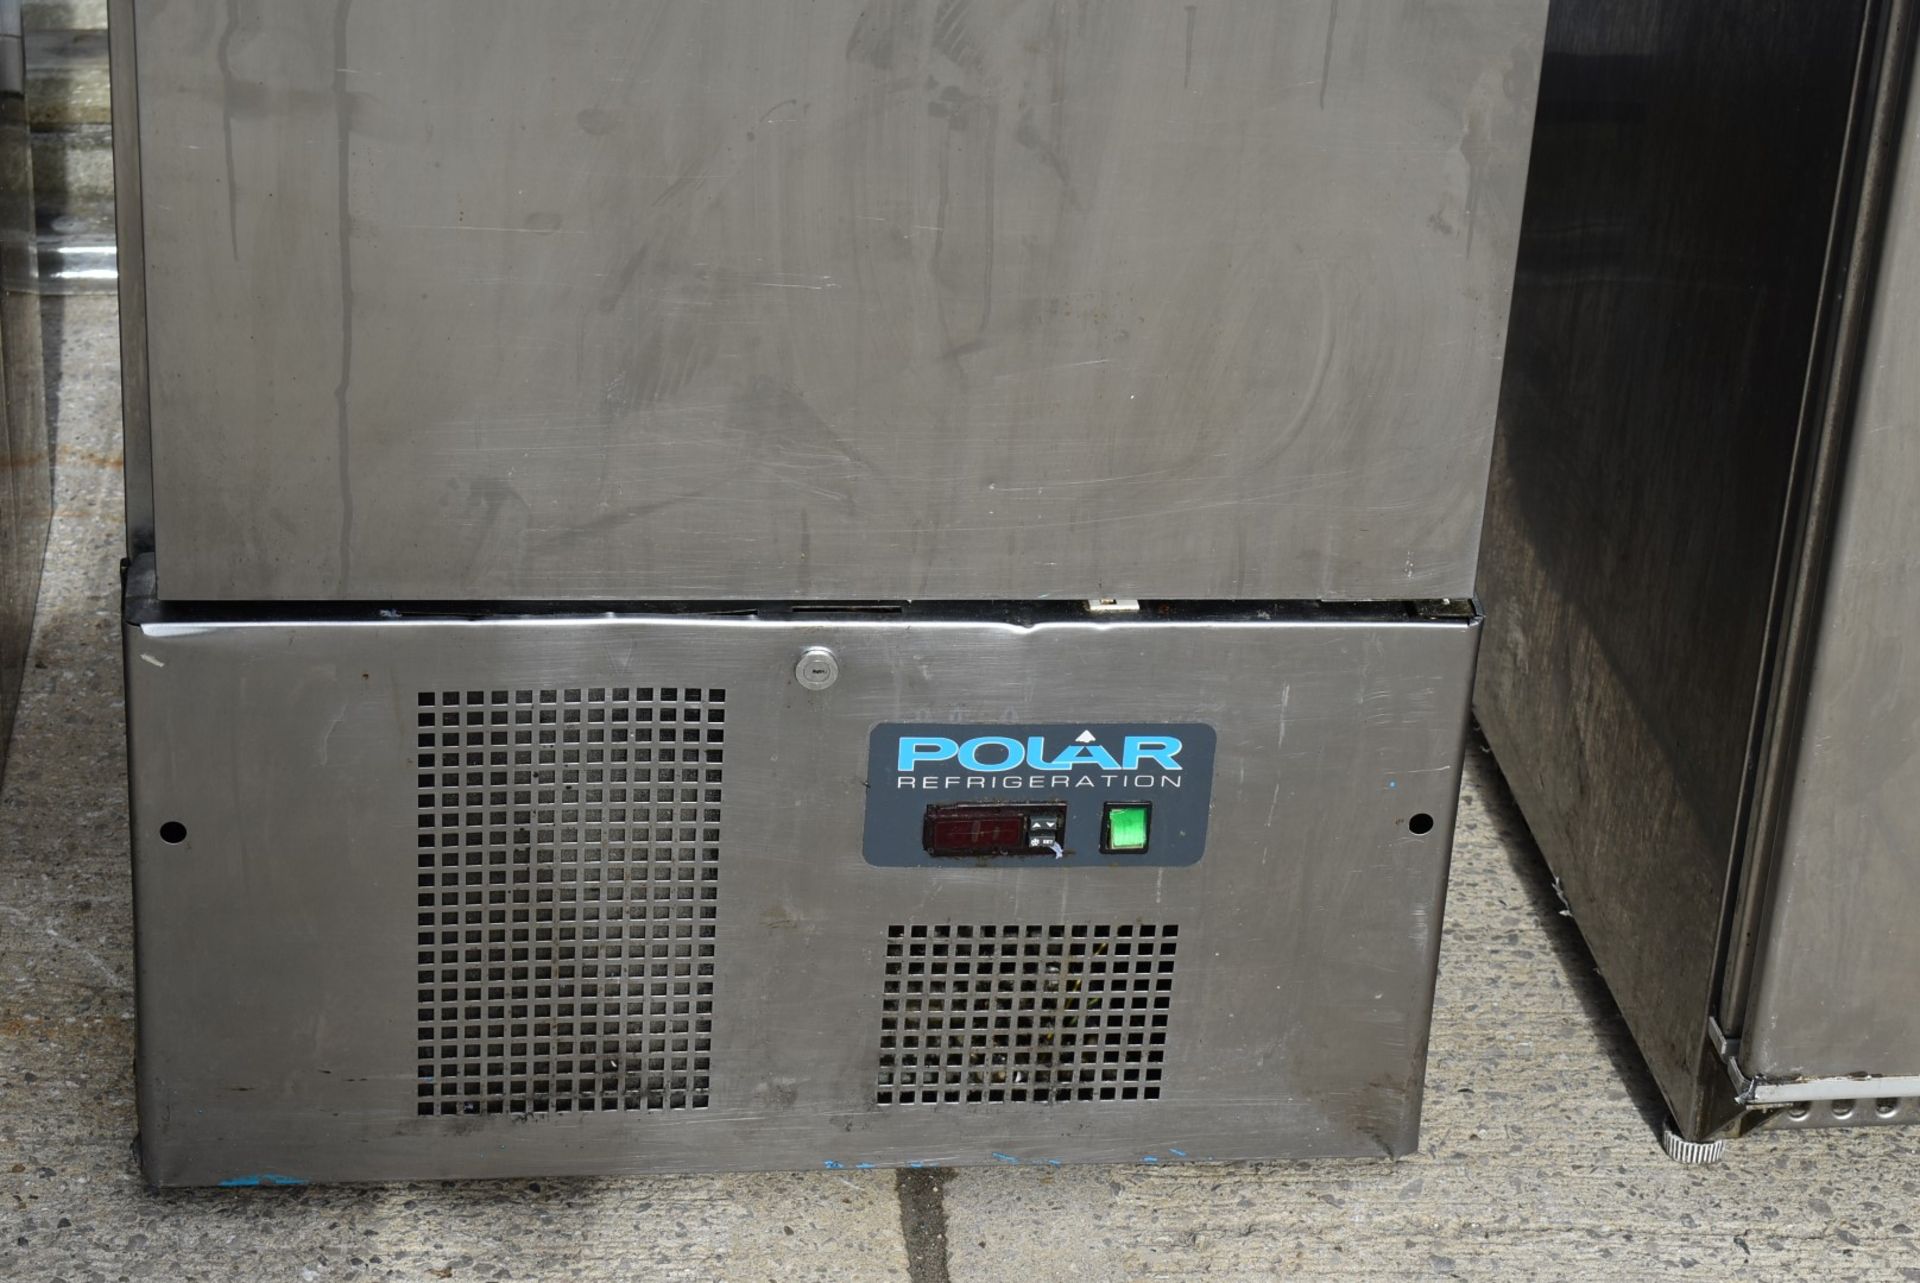 1 x Polar G590 Upright Commercial Fridge - Size: H188 x W65 x D70 cms - Recently Removed From a Dark - Image 2 of 6